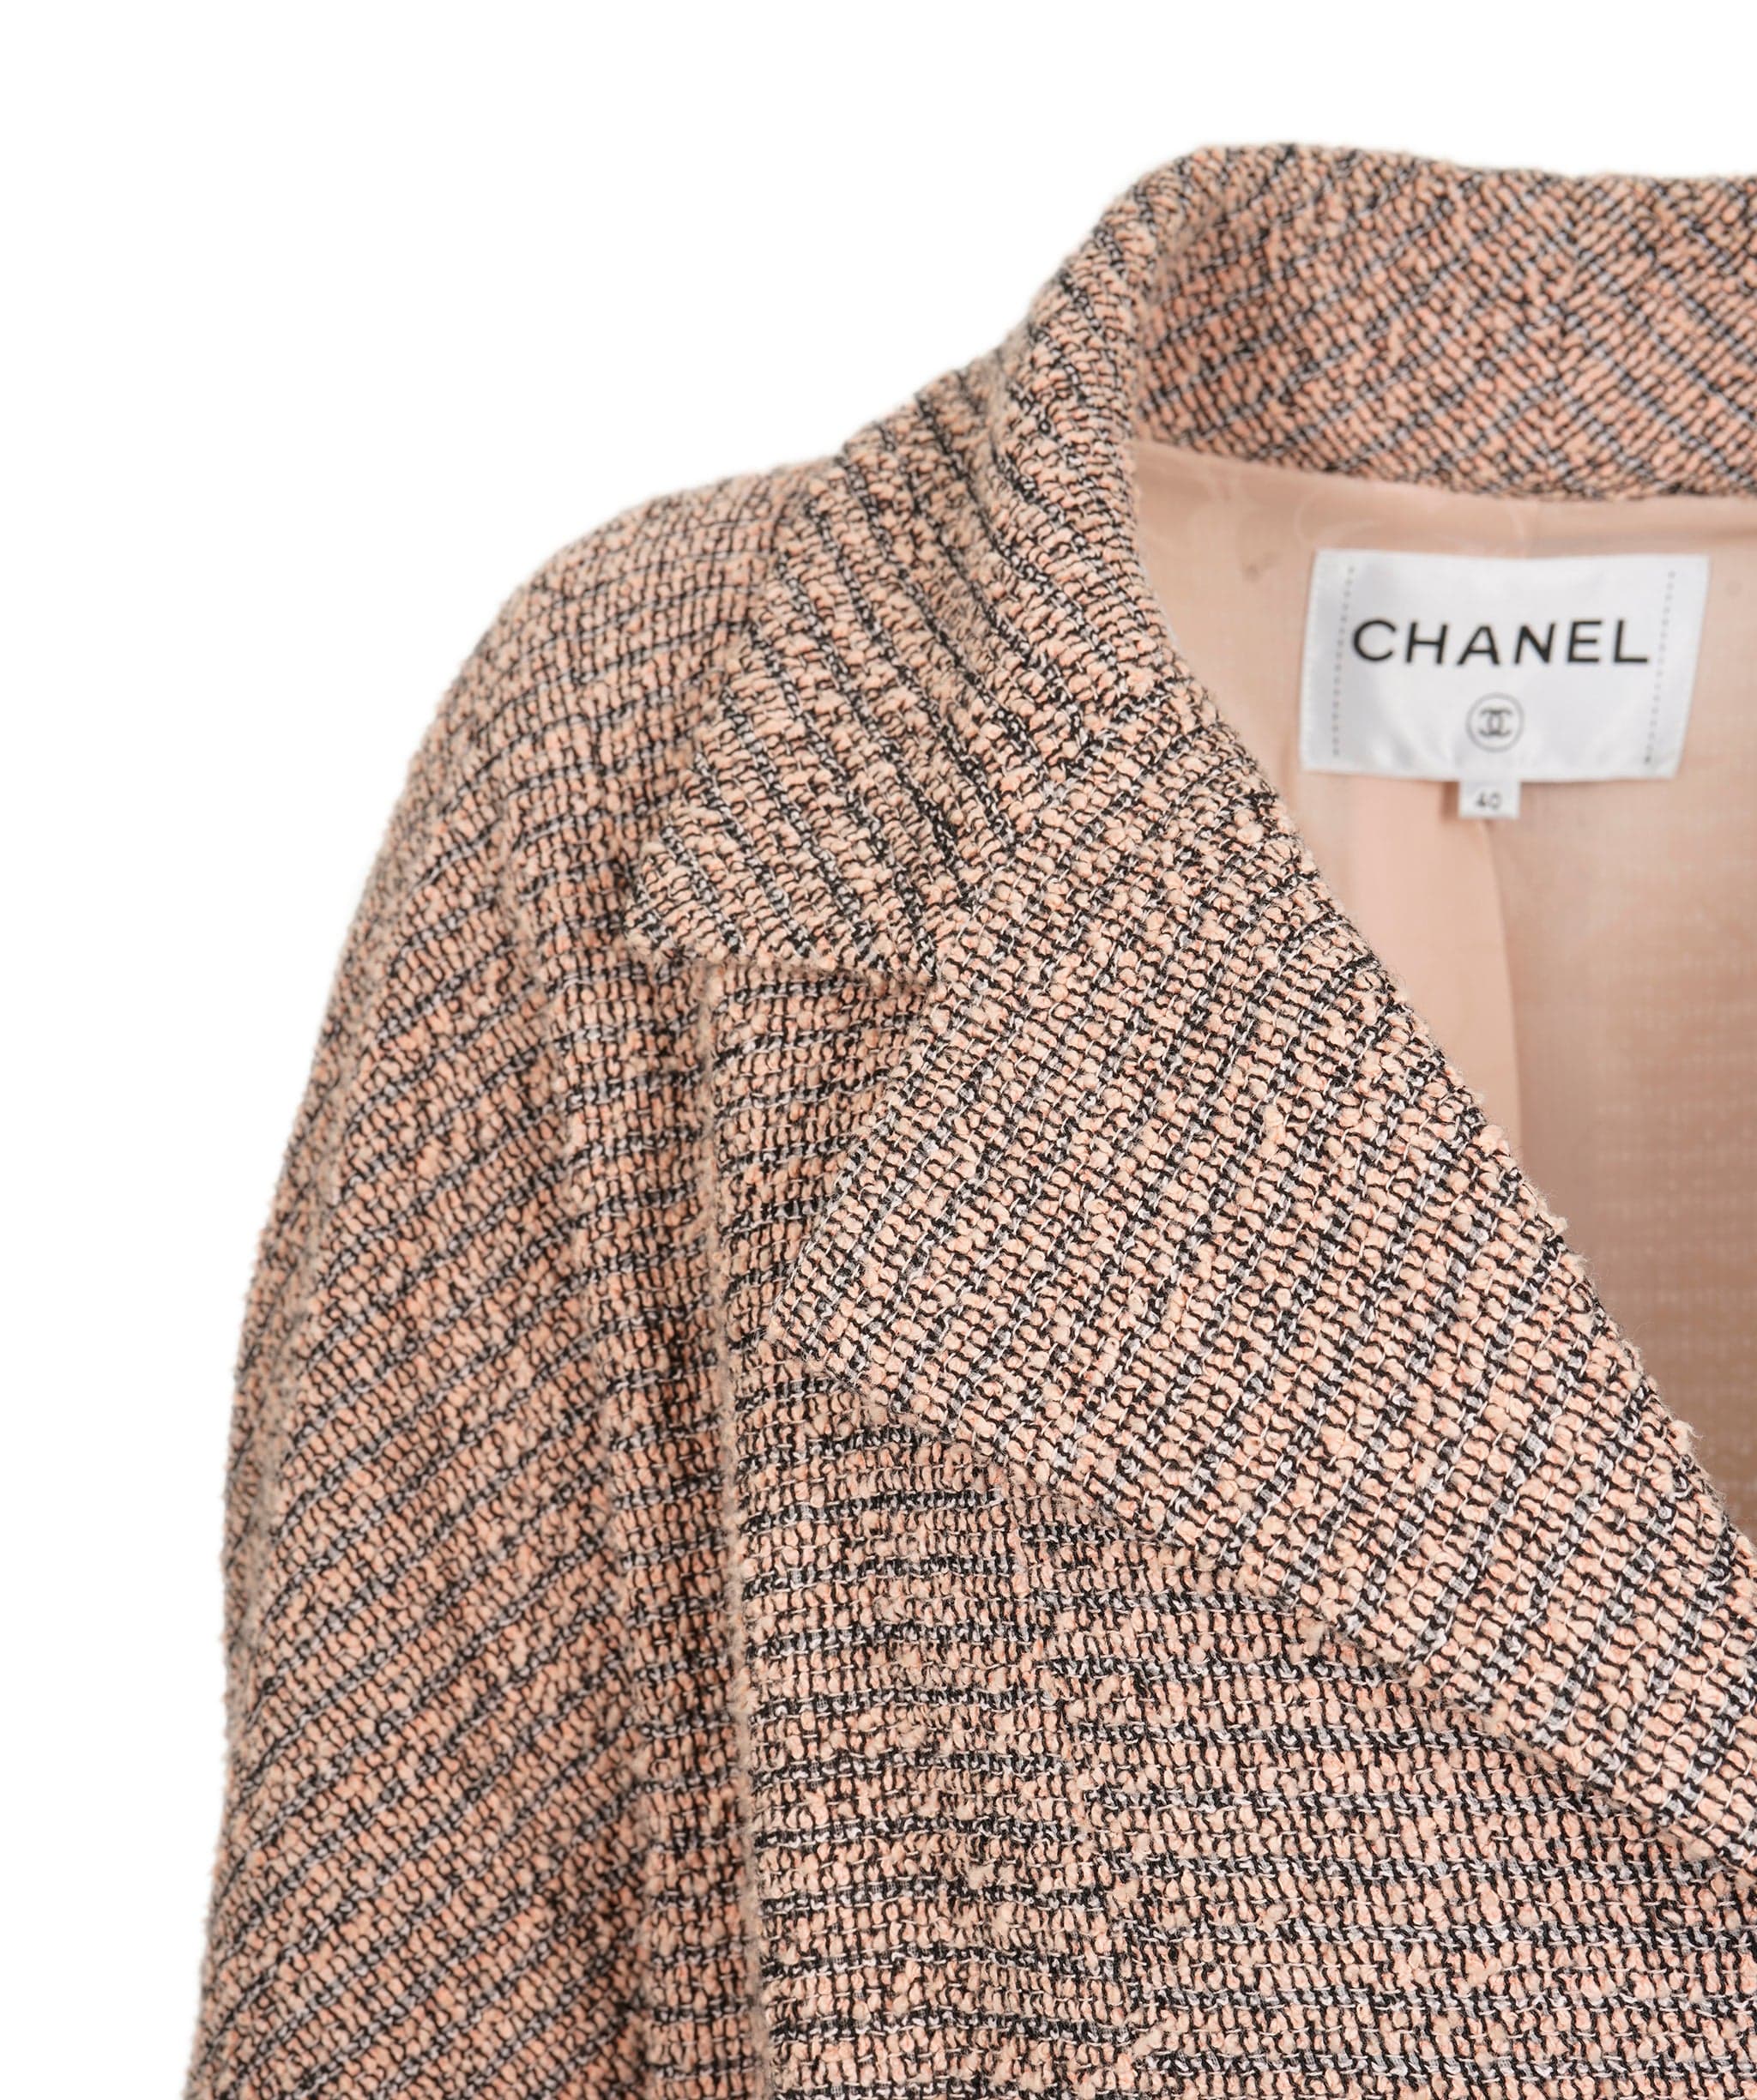 Chanel Chanel Dusty Pink Tweed Coat with CC Buttons Size FR 40 (UK 12) ASL9733